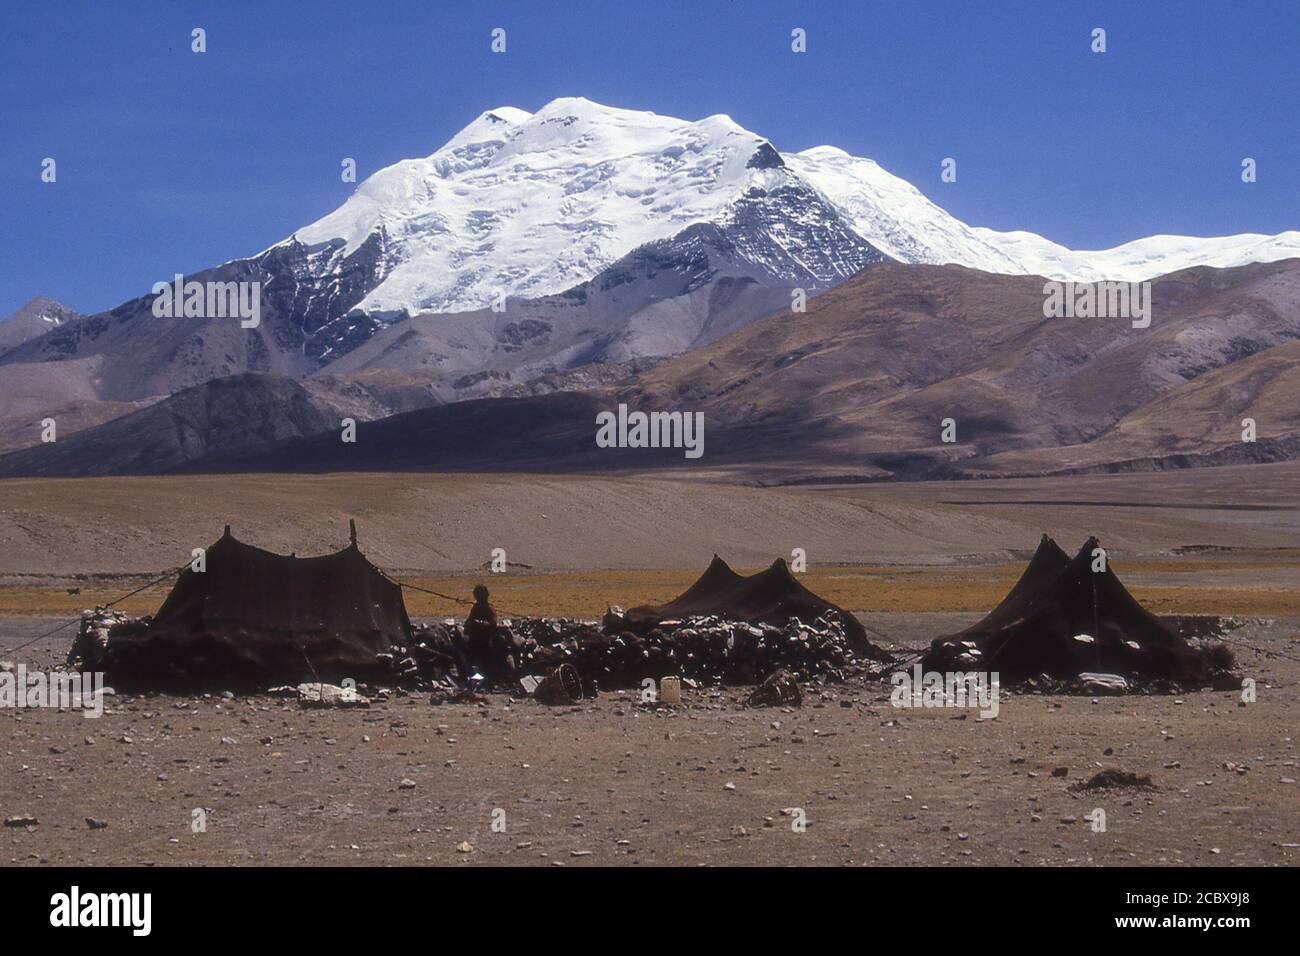 TIBET - NOMADS TENTS IN FRONT OF SNOW COVERED MOUNTAIN. Stock Photo